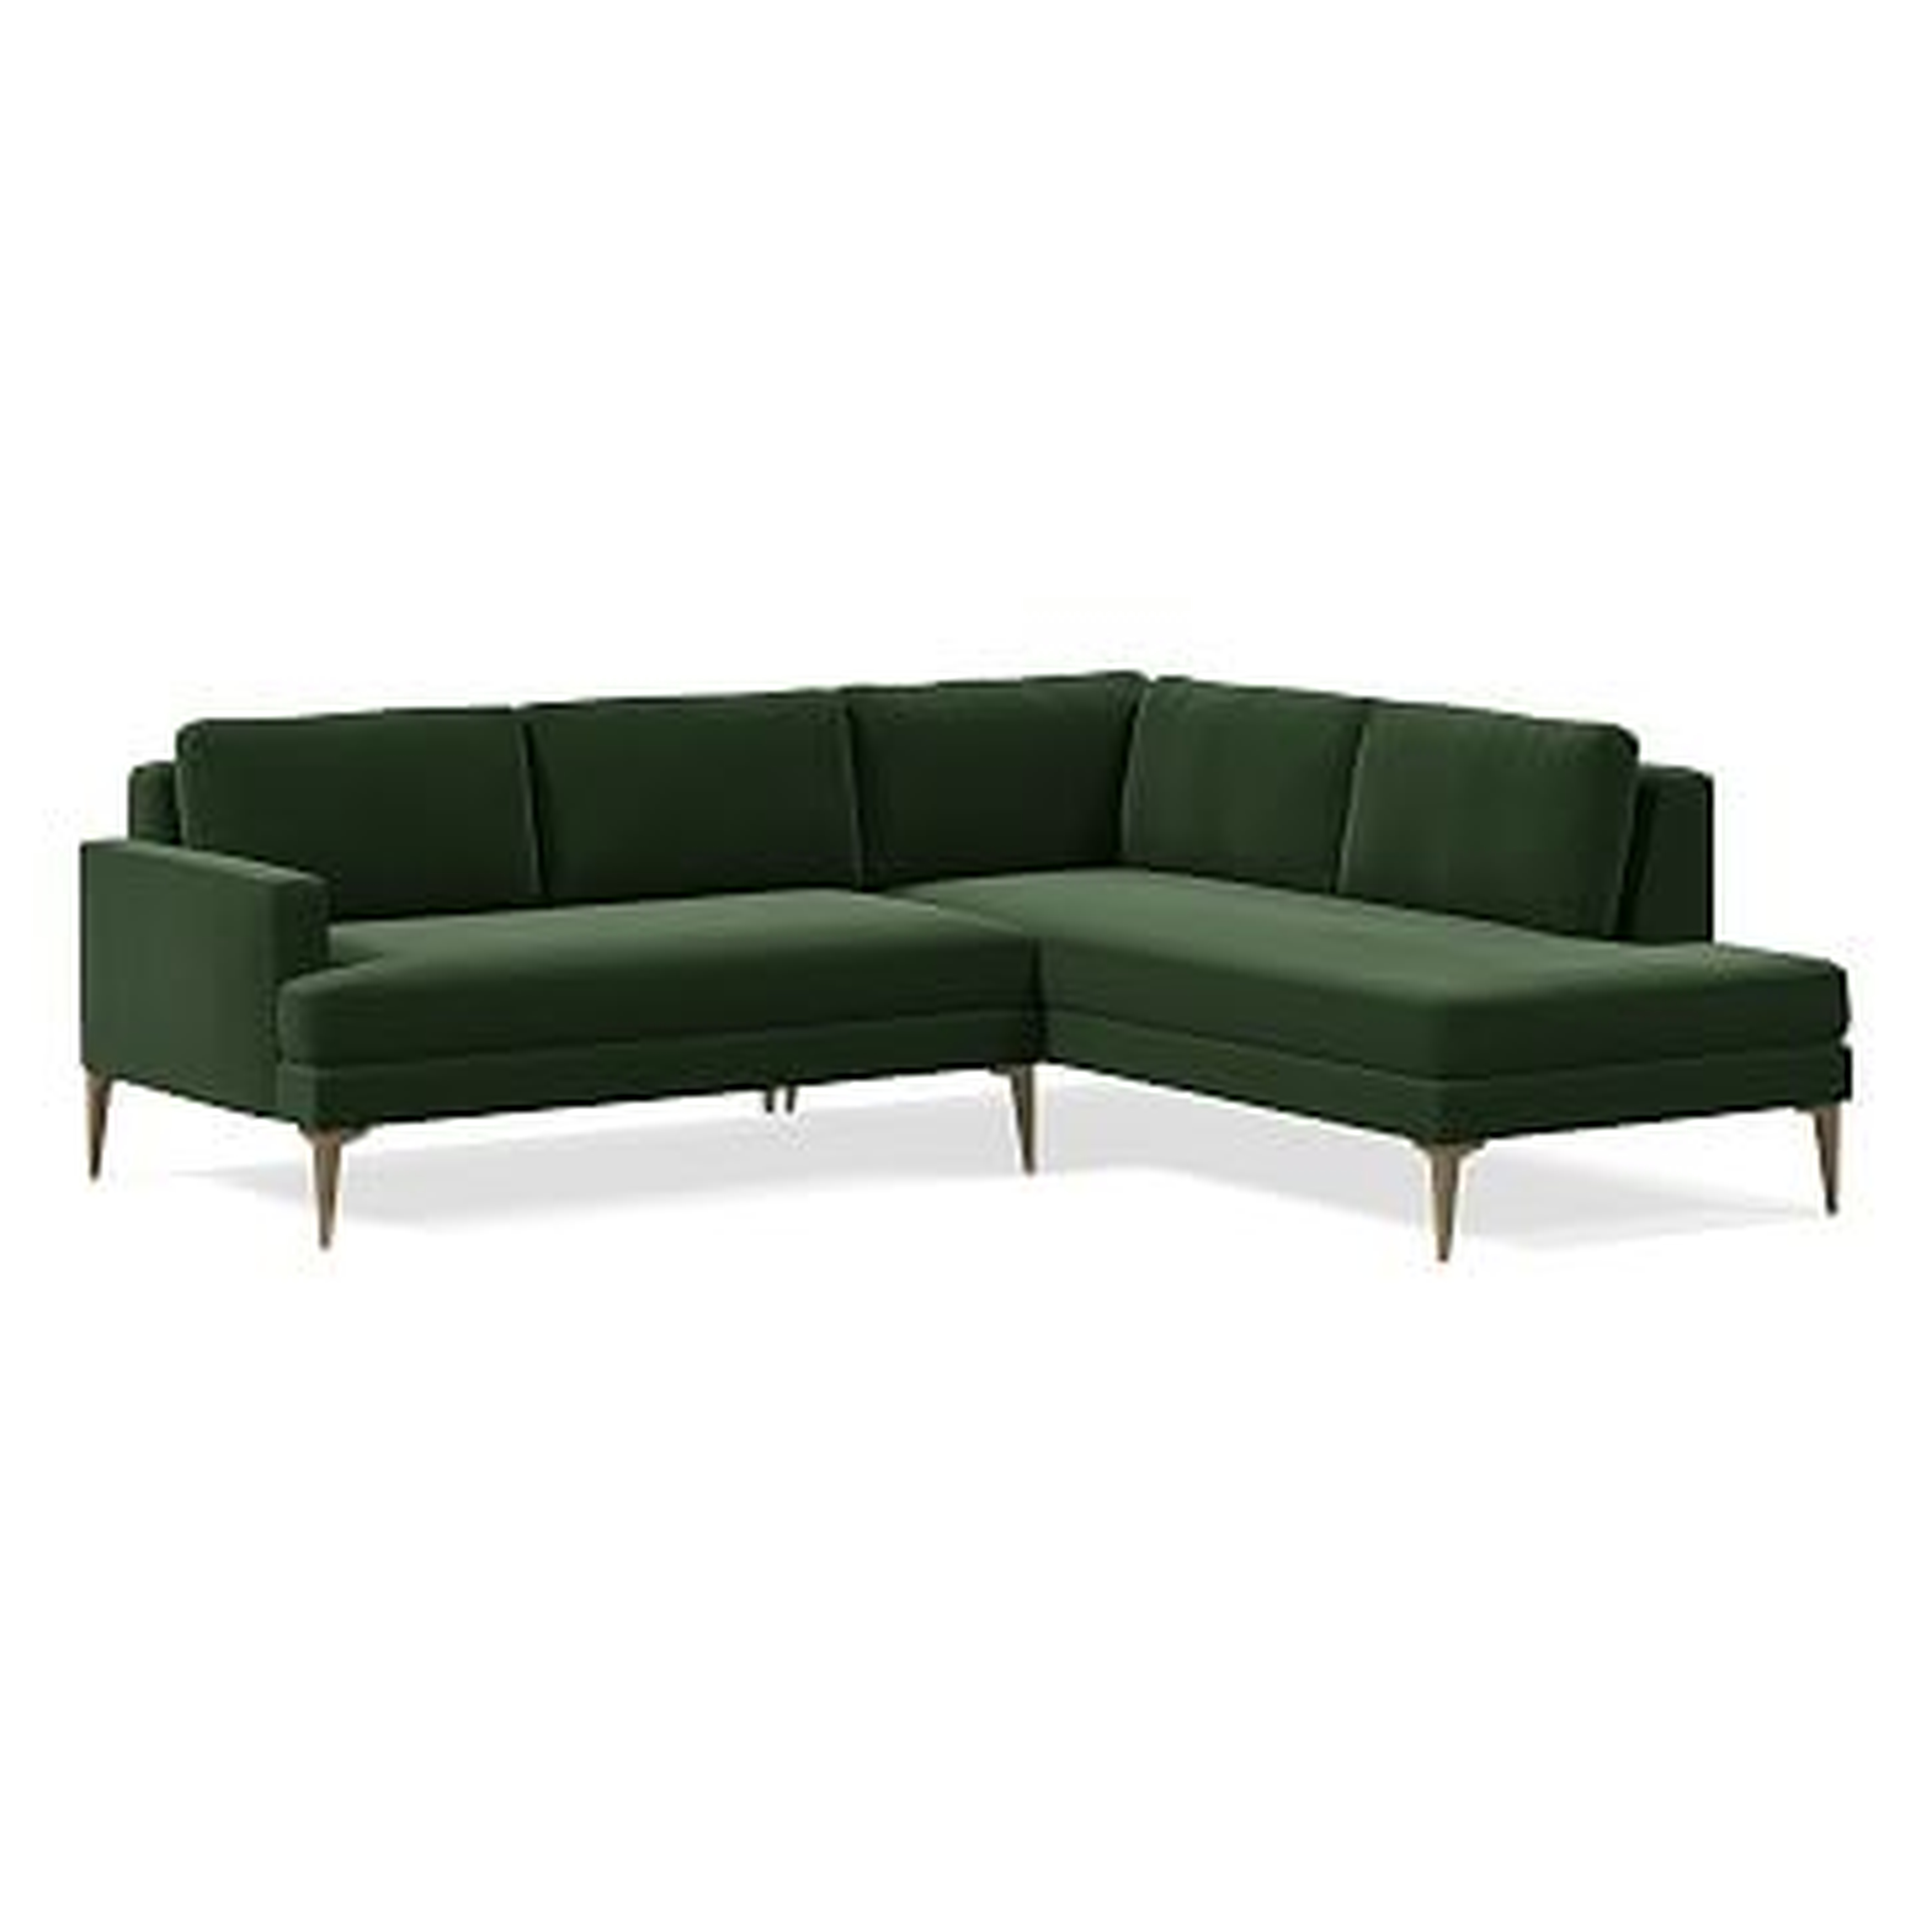 Andes Petite Sectional Set 55: Left Arm 2 Seater Sofa, Right Arm Terminal Chaise, Poly, Performance Velvet, Moss, Blackened Brass - West Elm